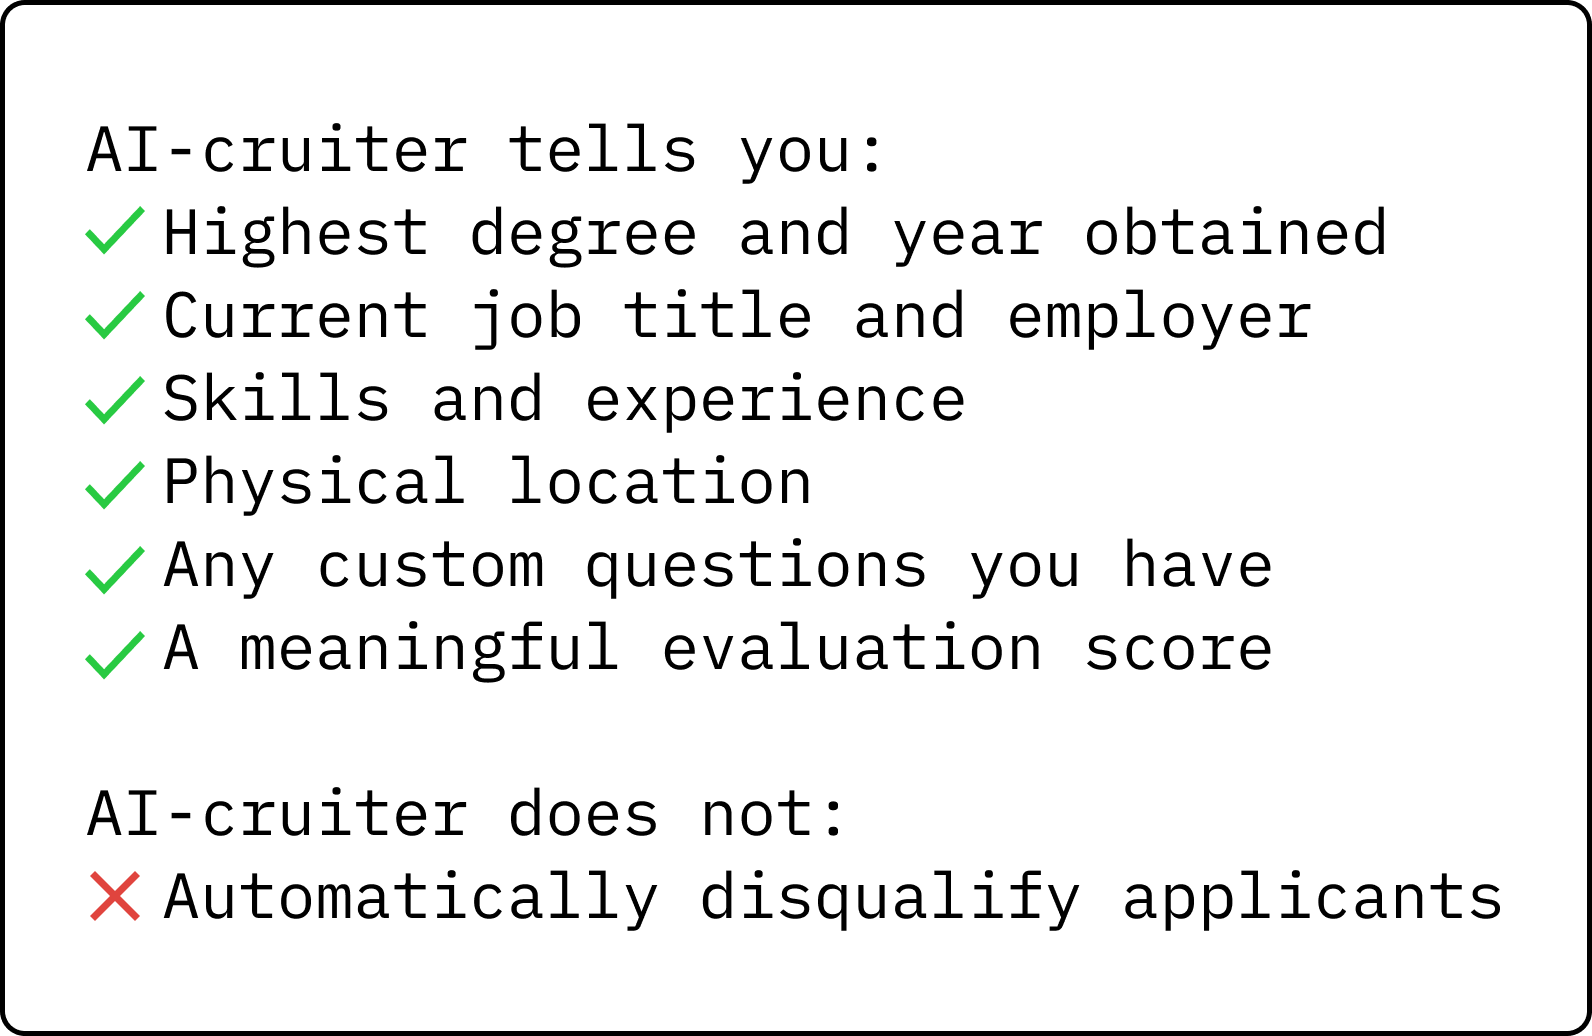 AI-cruiter does not judge or automatically disqualify applicants